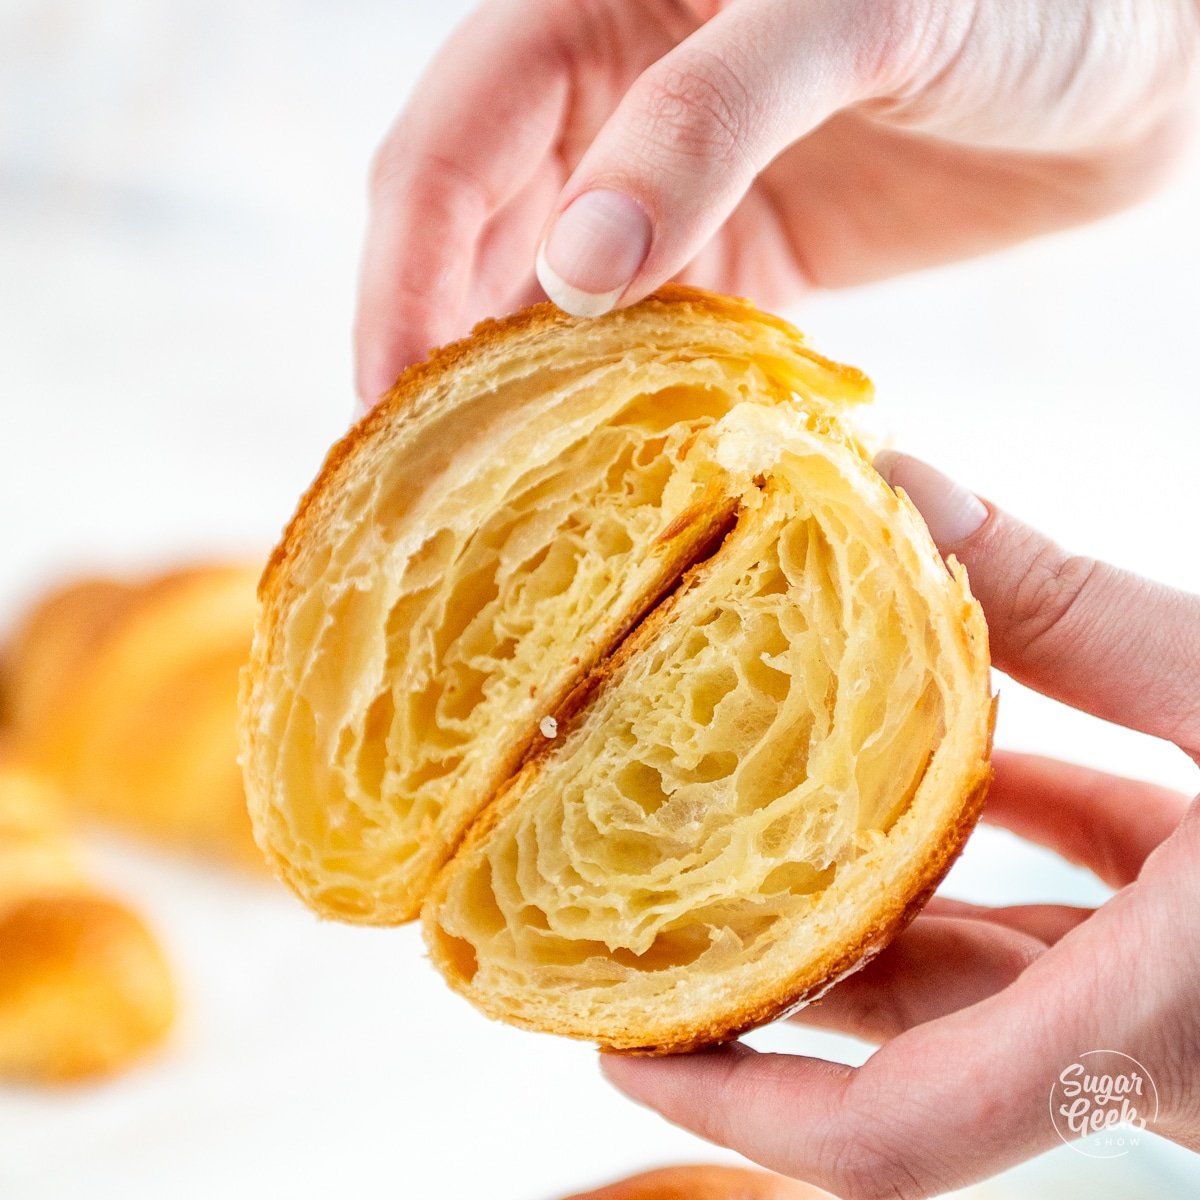 hands holding open a croissant to show the flaky inside layers